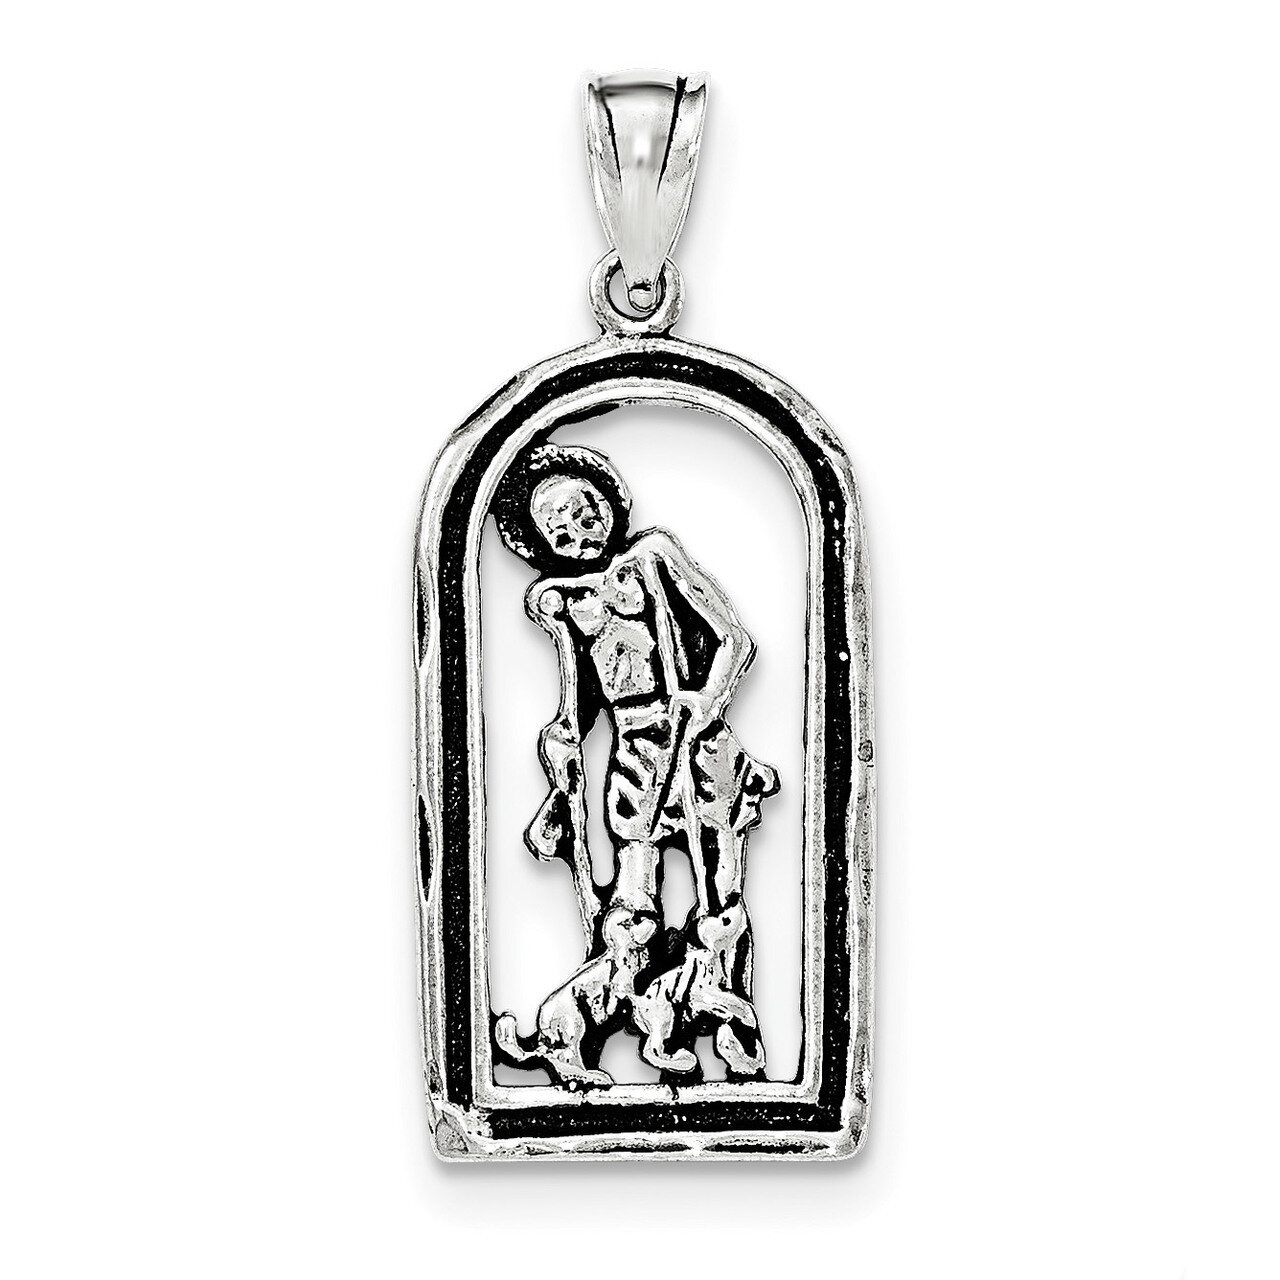 Antiqued St. Lazarus in Frame Pendant Sterling Silver QC8342